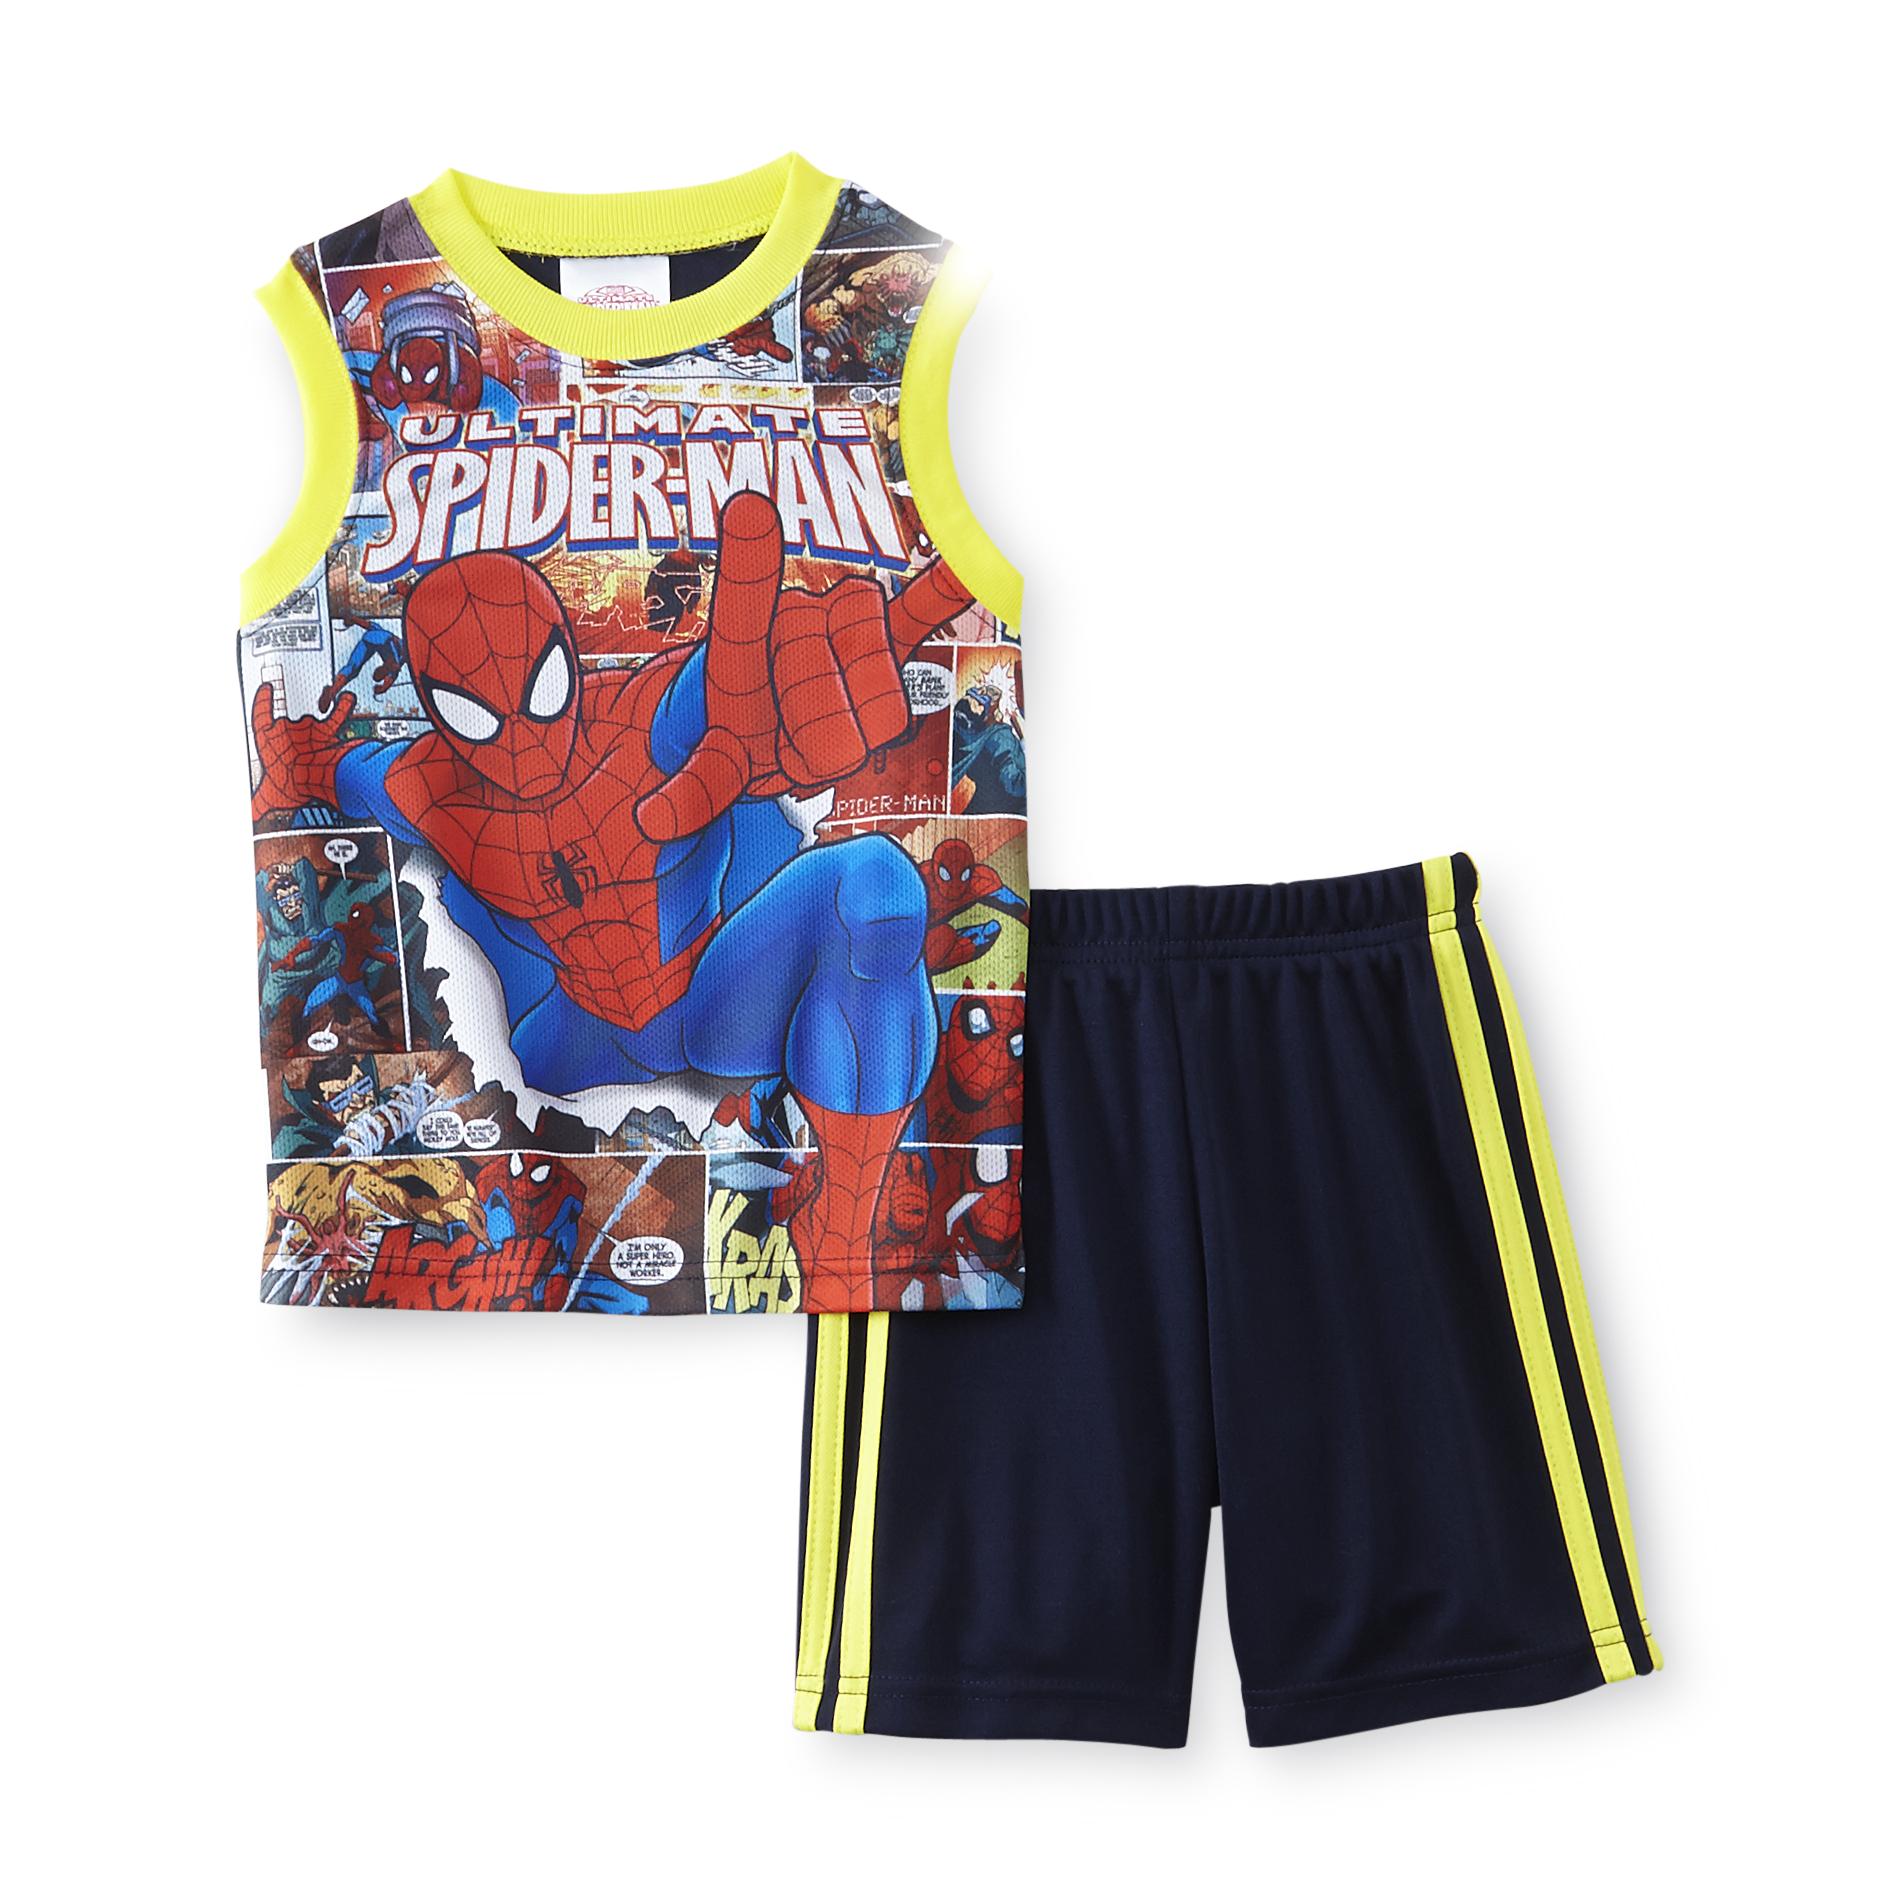 Marvel Ultimate Spider-Man Toddler Boy's Graphic Tank Top & Shorts